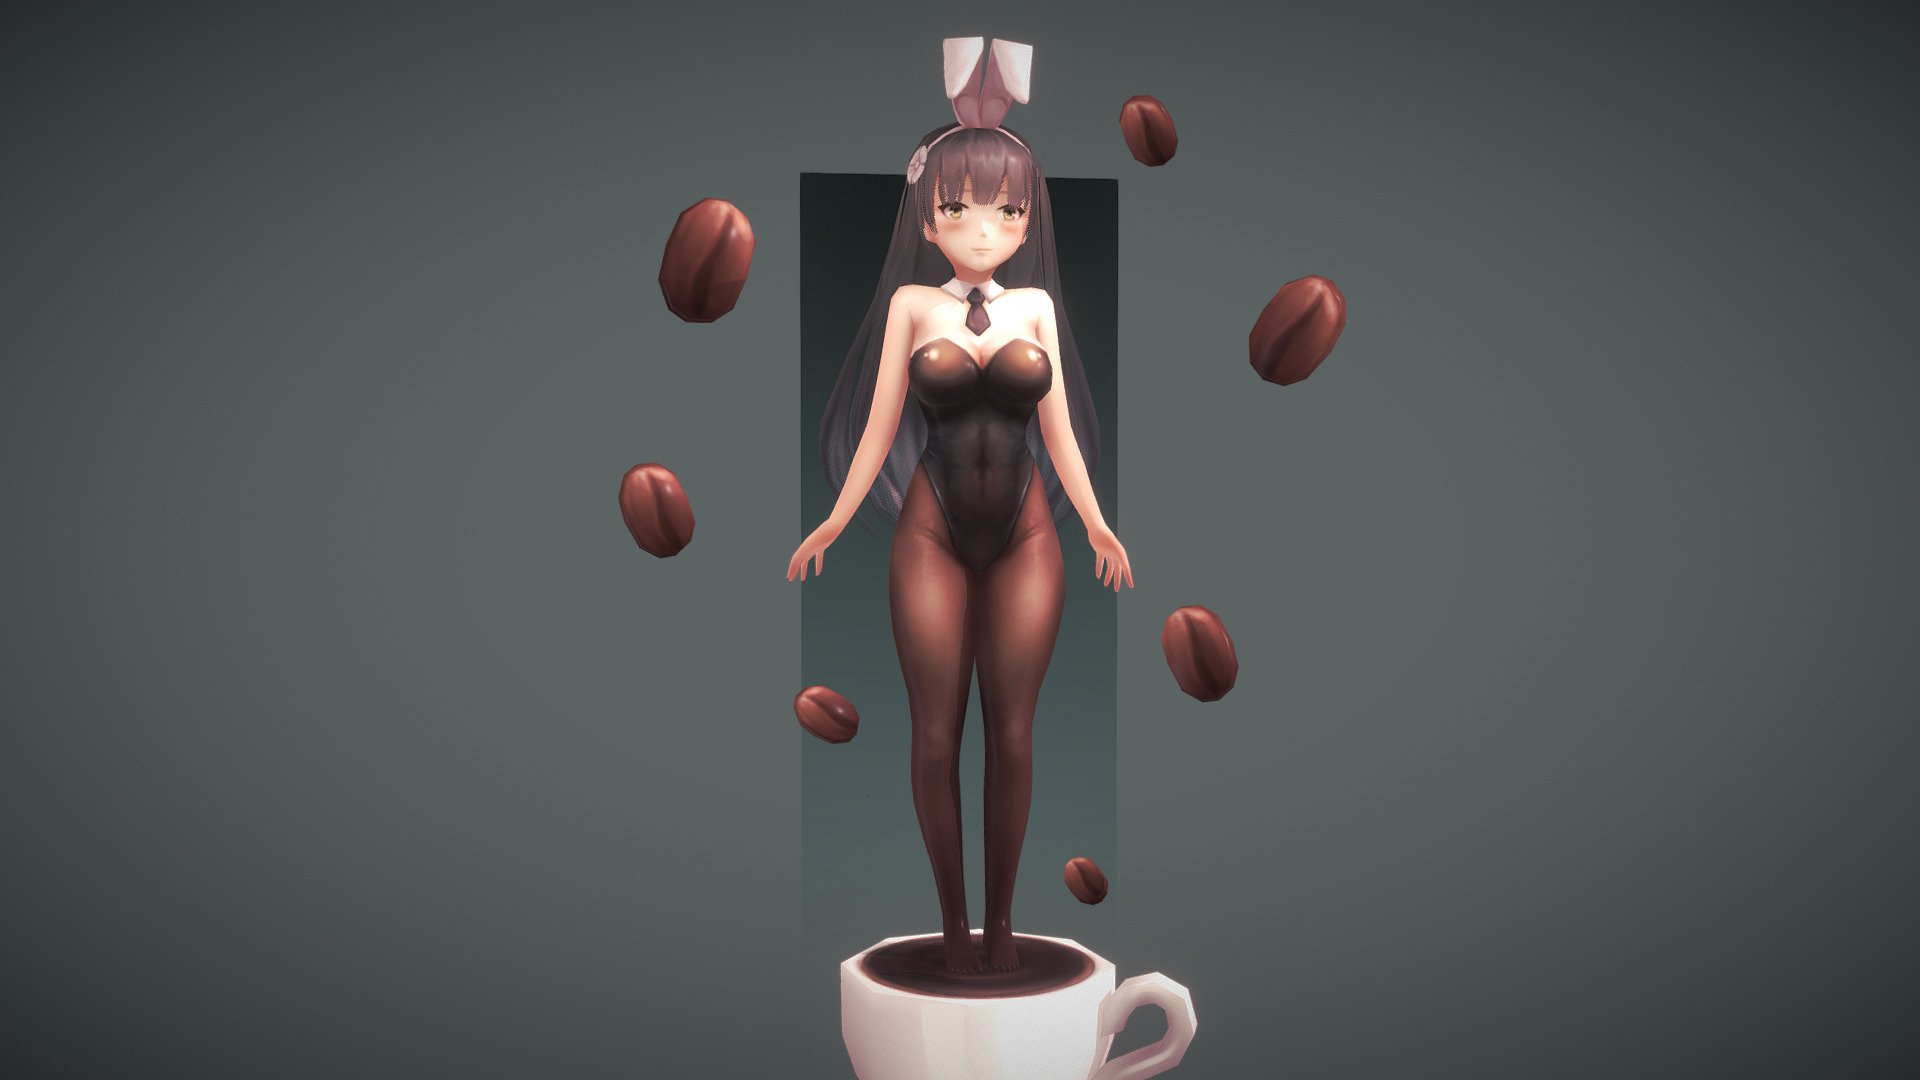 Hand painted game ready character.  Made with Blender.
Girl is based on Lee Seok Ho painting (https://www.artstation.com/artwork/QzzW6r) - Coffee - 3D model by rudolfs 3d model